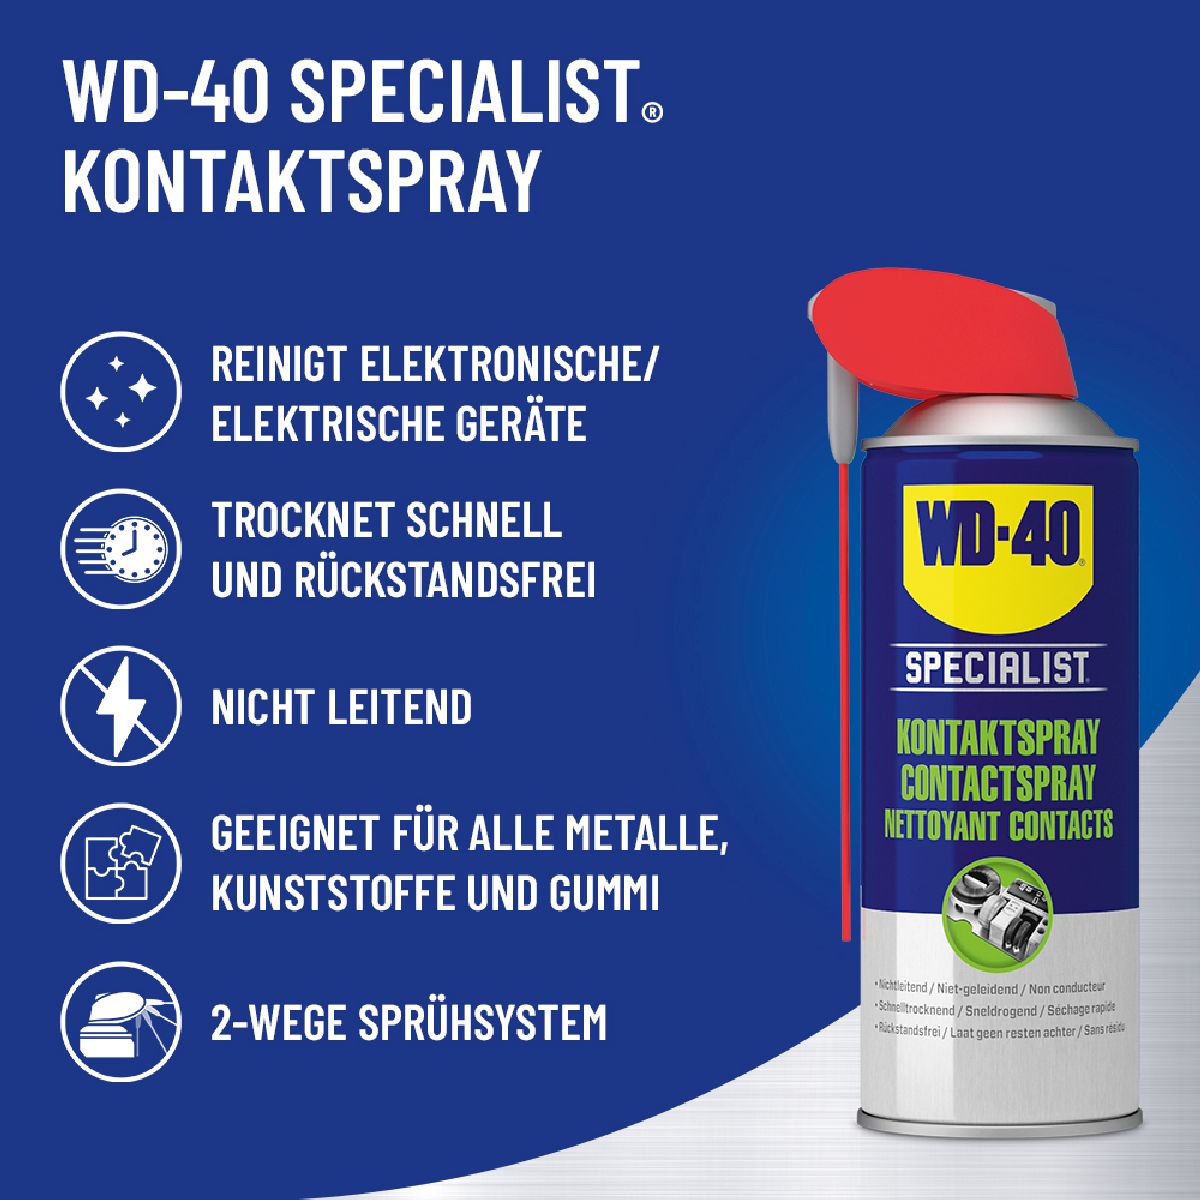 WD-40 Specialist Nettoyant Contacts Bombe arosol 300 ml